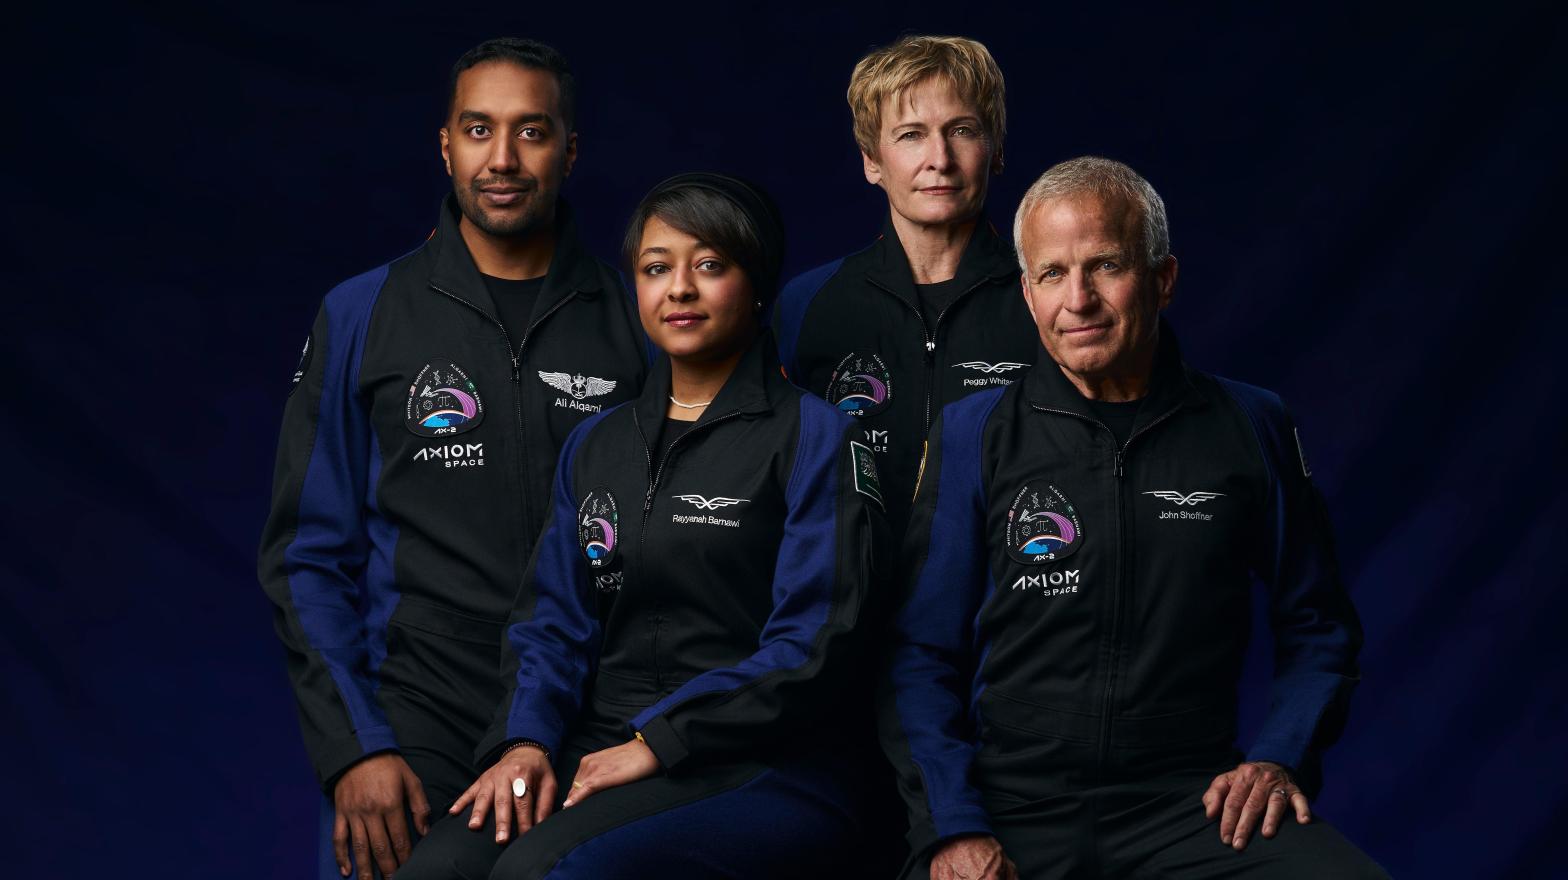 The Ax-2 crew, from left to right: Ali Alqarni, Rayyanah Barnawi. Peggy Whitson, and John Shoffner. (Image: Axiom Space)